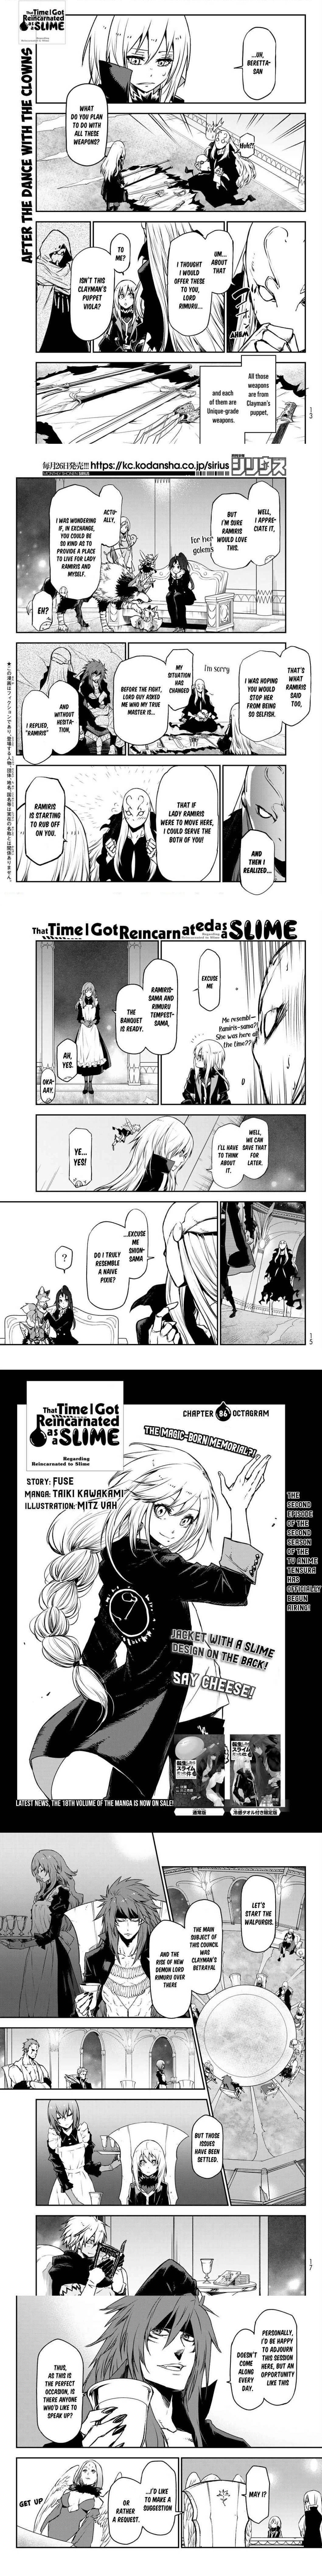 That Time I Got Reincarnated as a Slime, Chapter 86